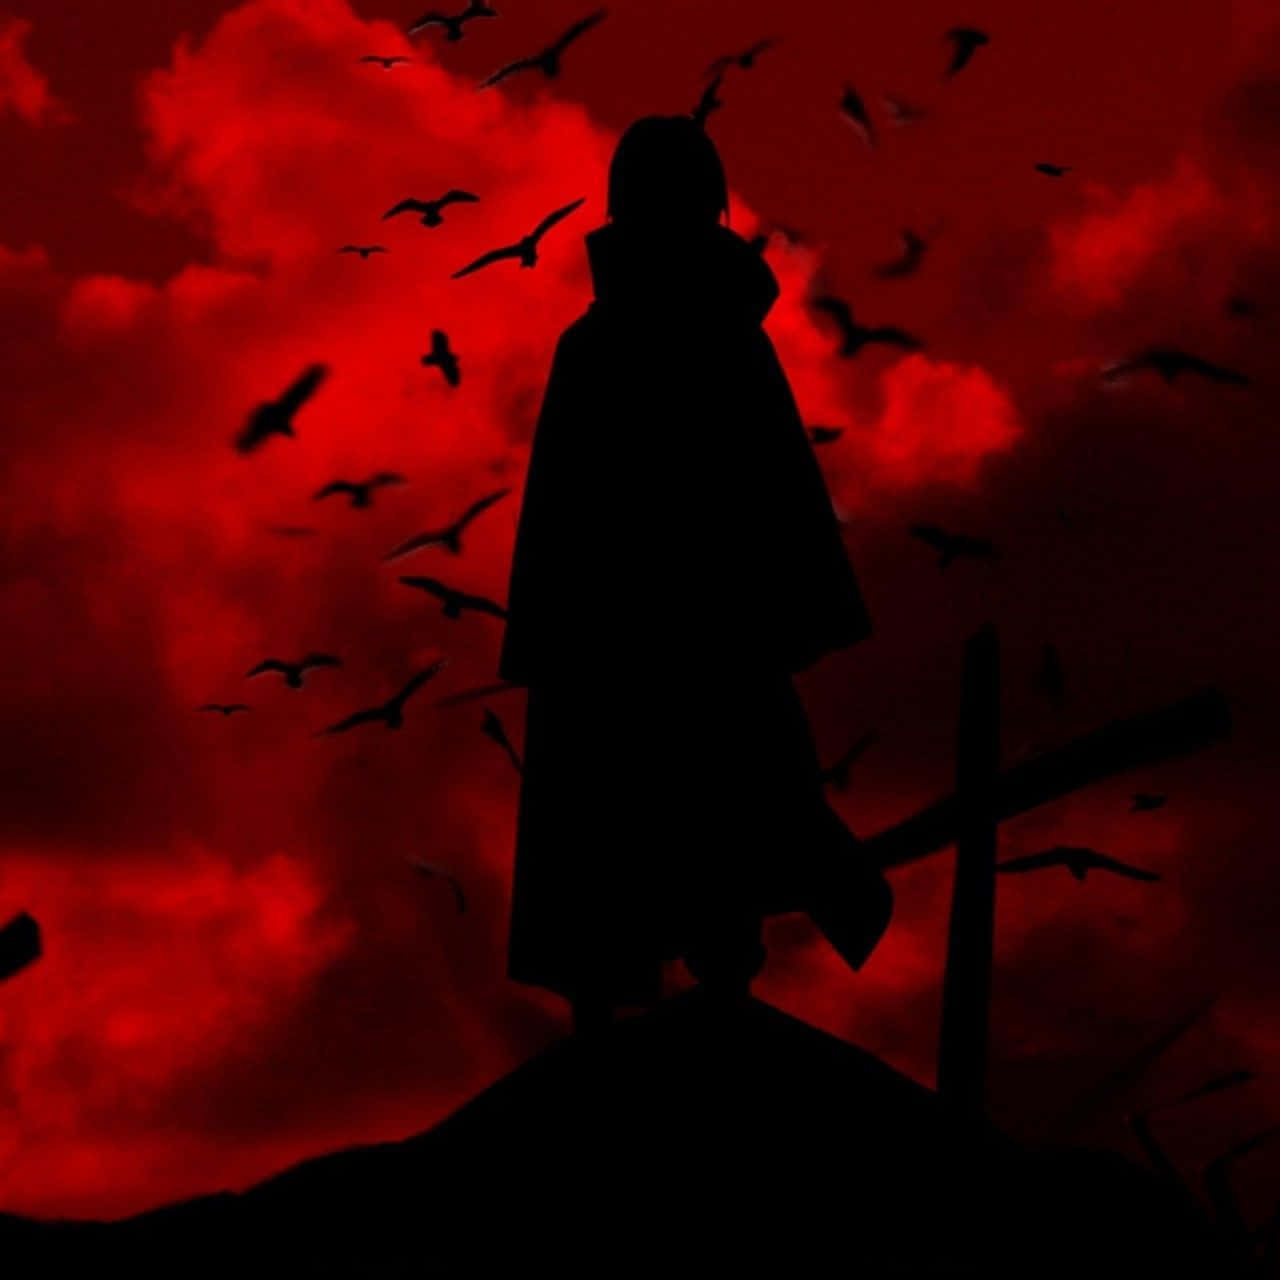 Silhouette Of Itachi Aesthetic With Many Crows Flying In Bright Red Skies Wallpaper